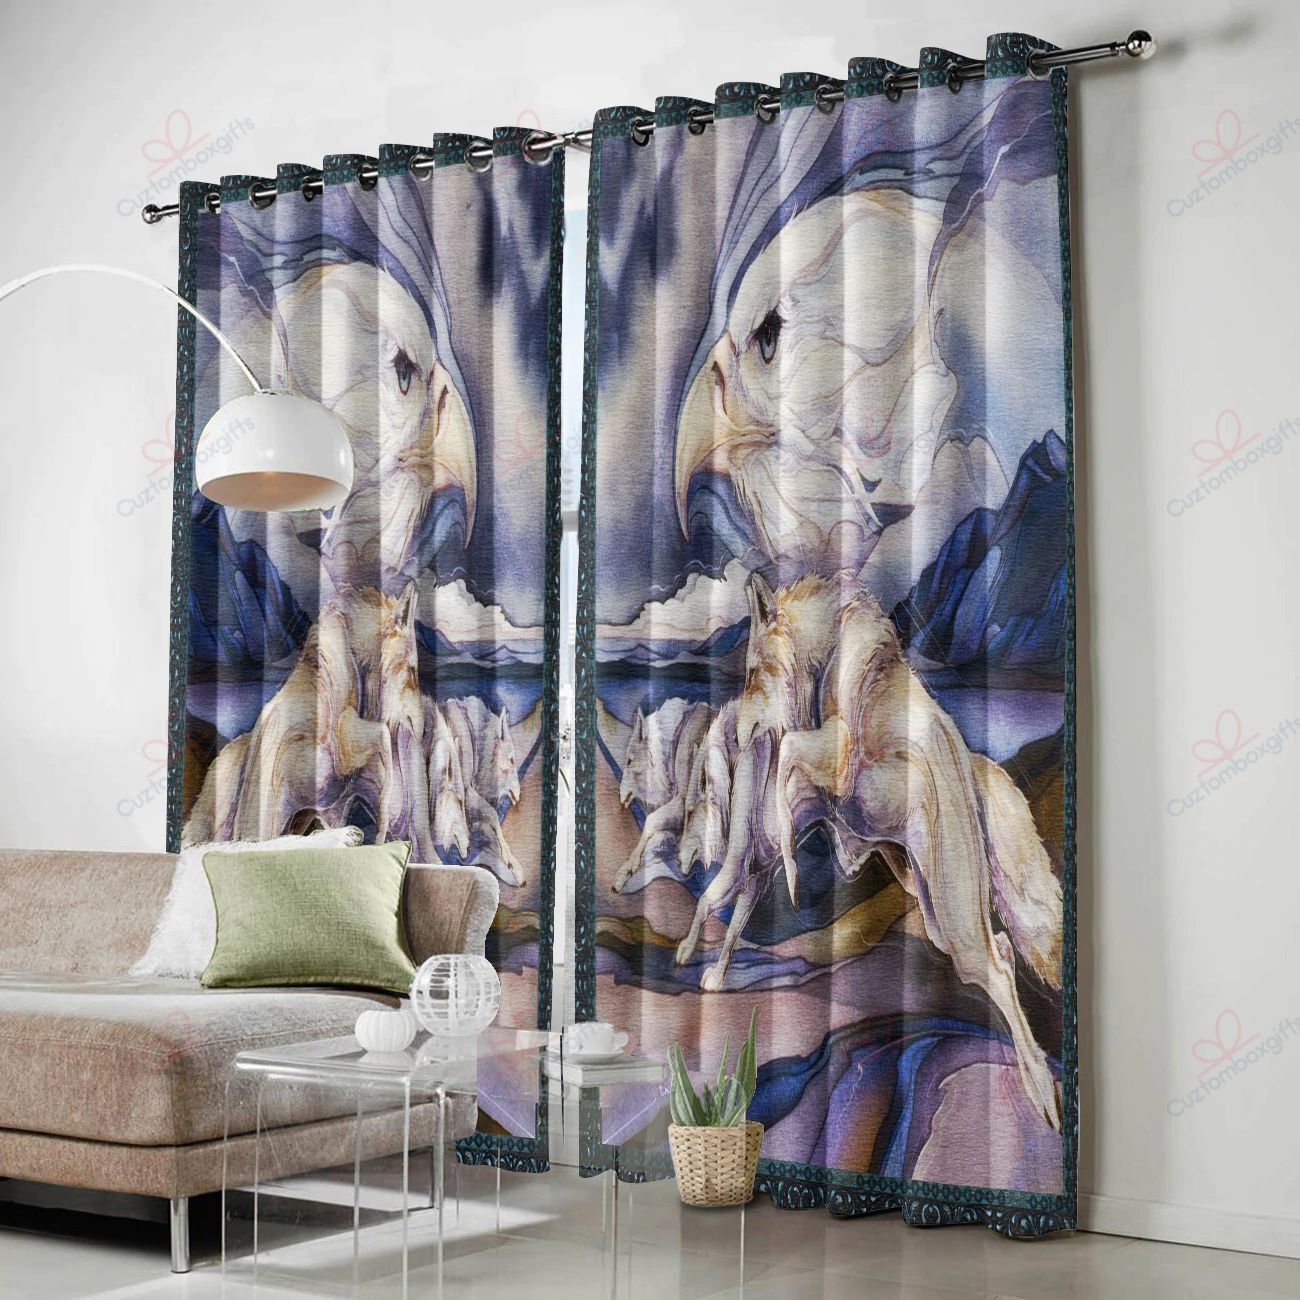 eagle and wolf mountain printed window curtain home decor 4727